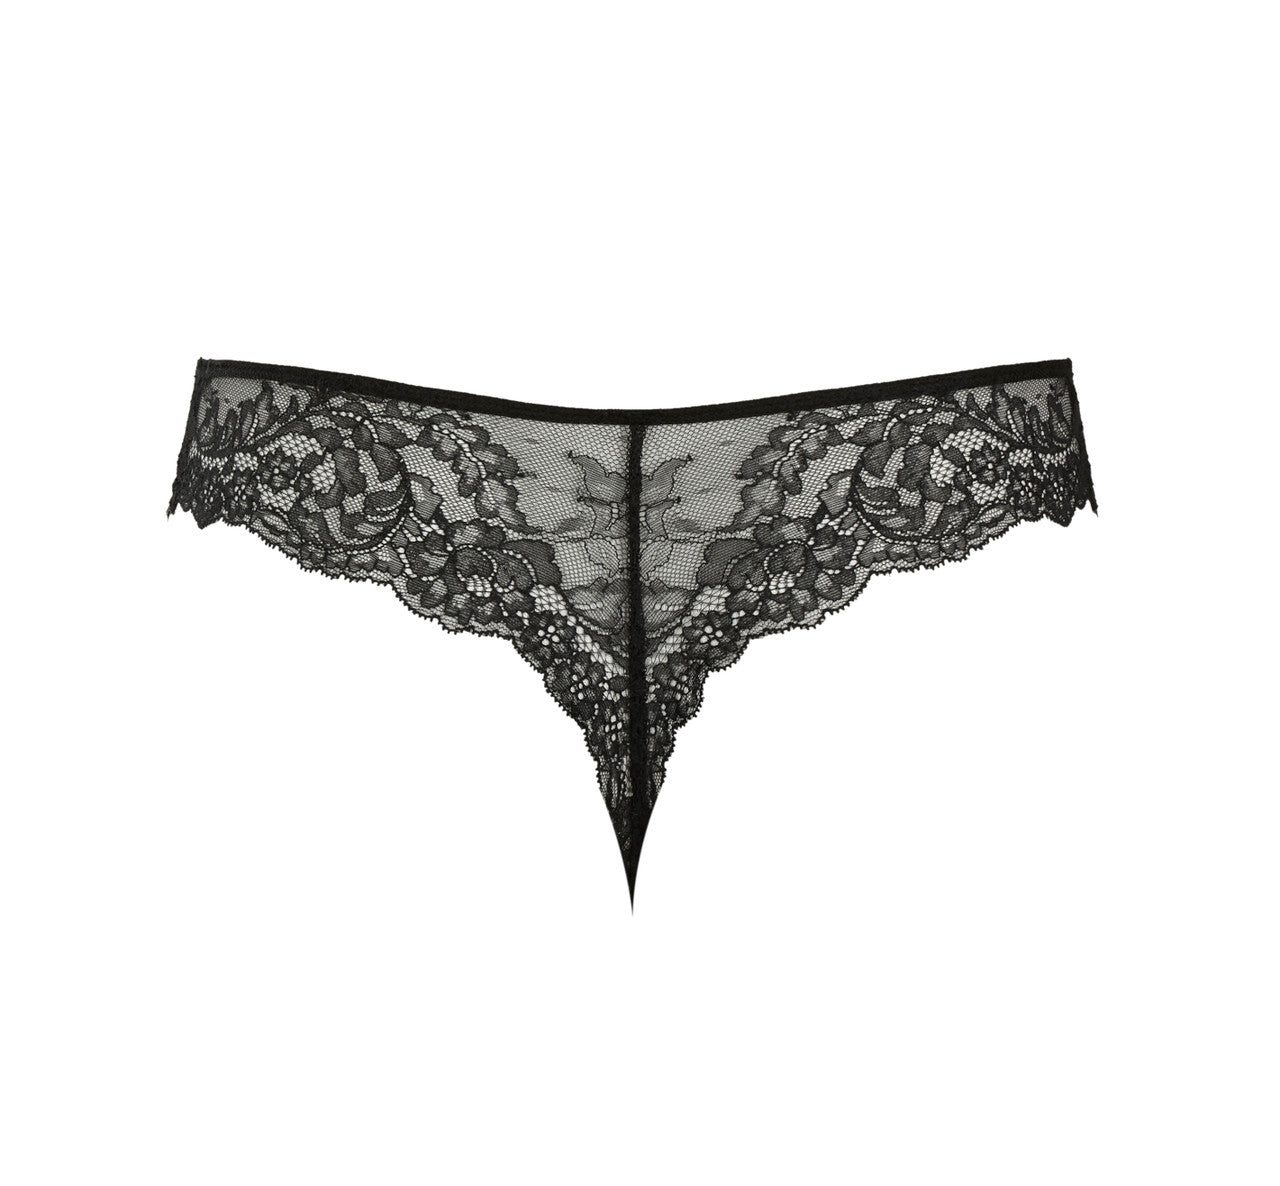 Pretty Things Panache Ana Black Thong - Underwear Specialists